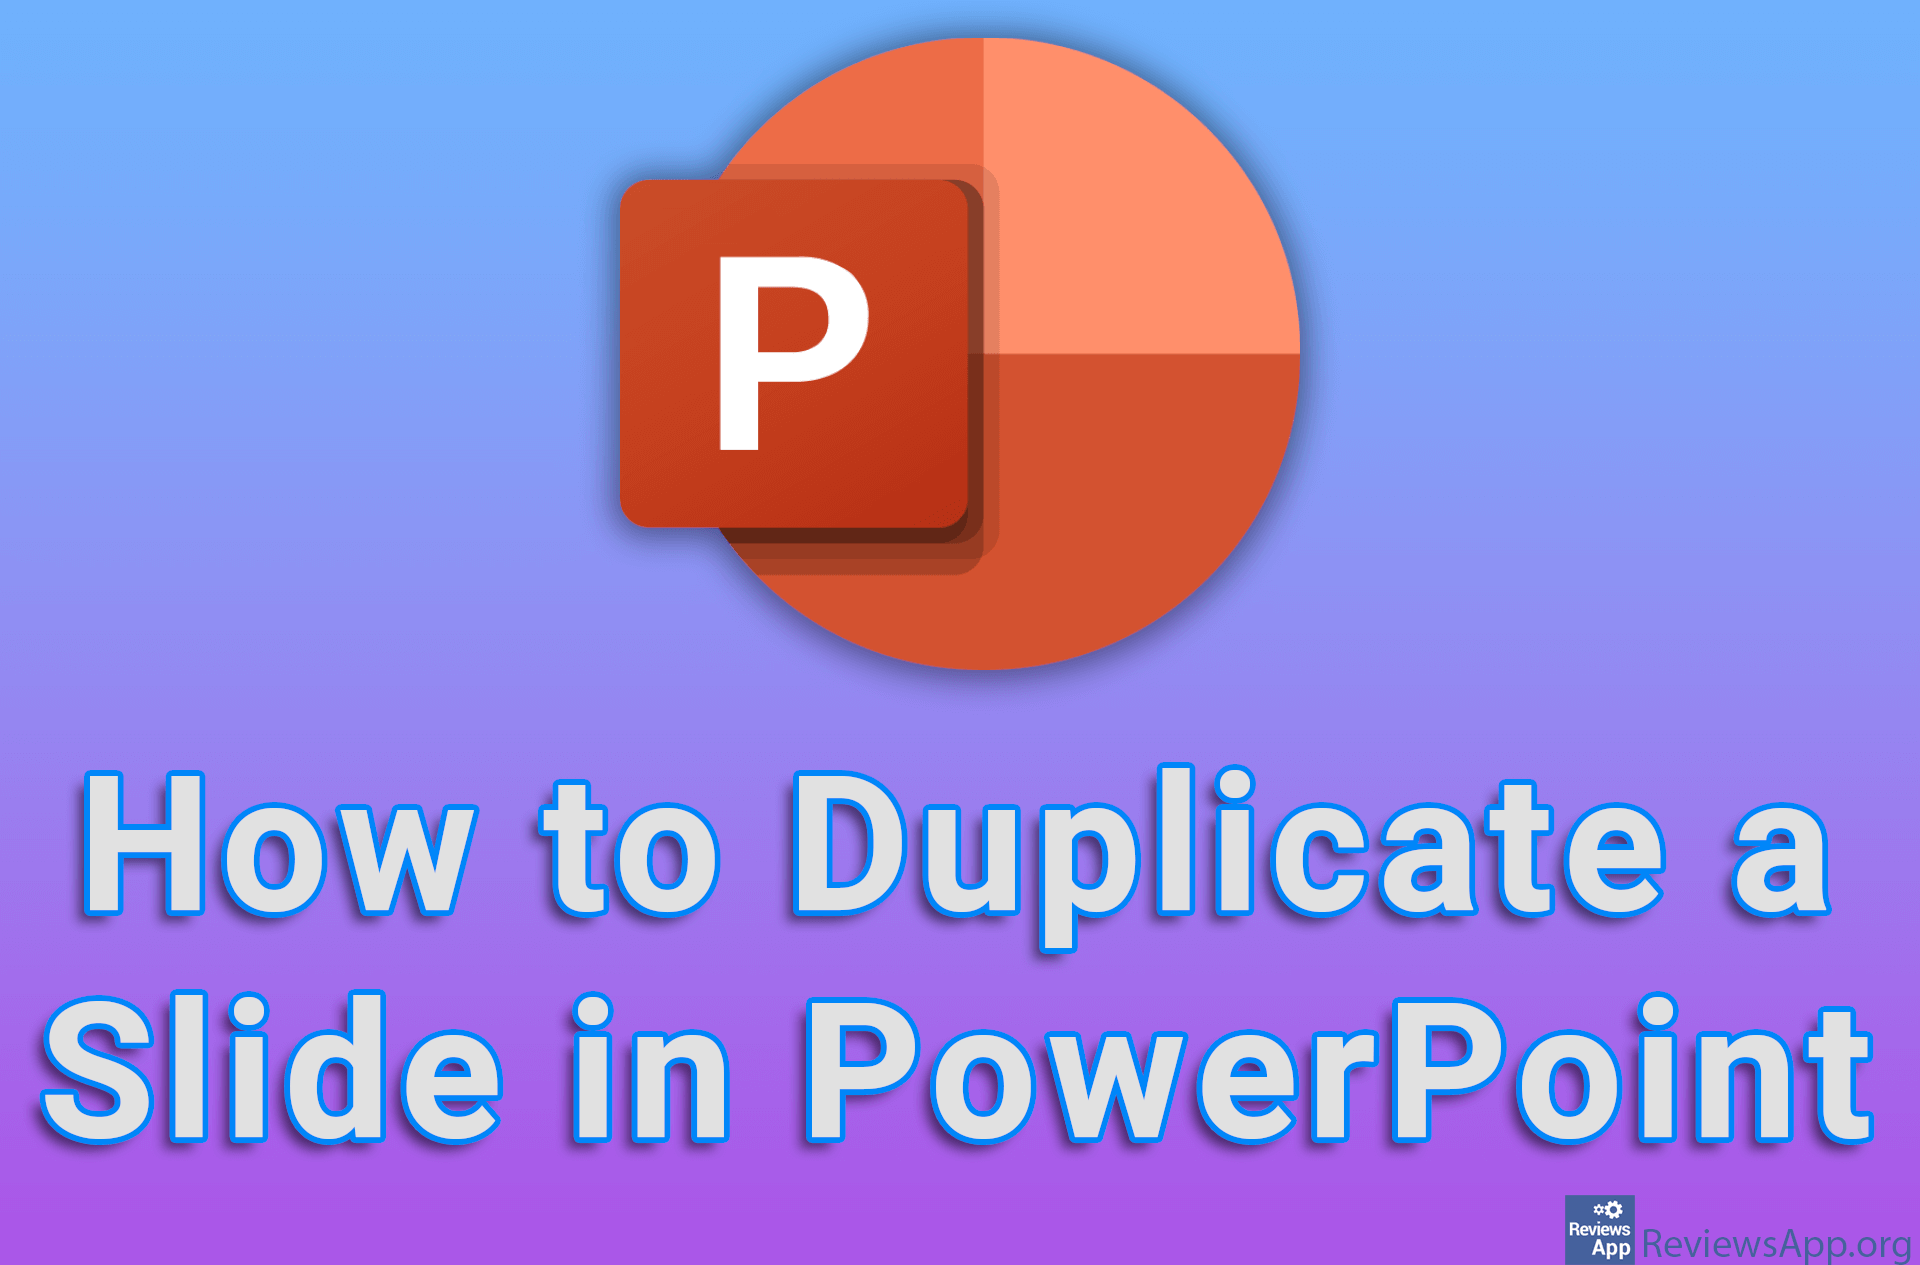 How to Duplicate a Slide in PowerPoint